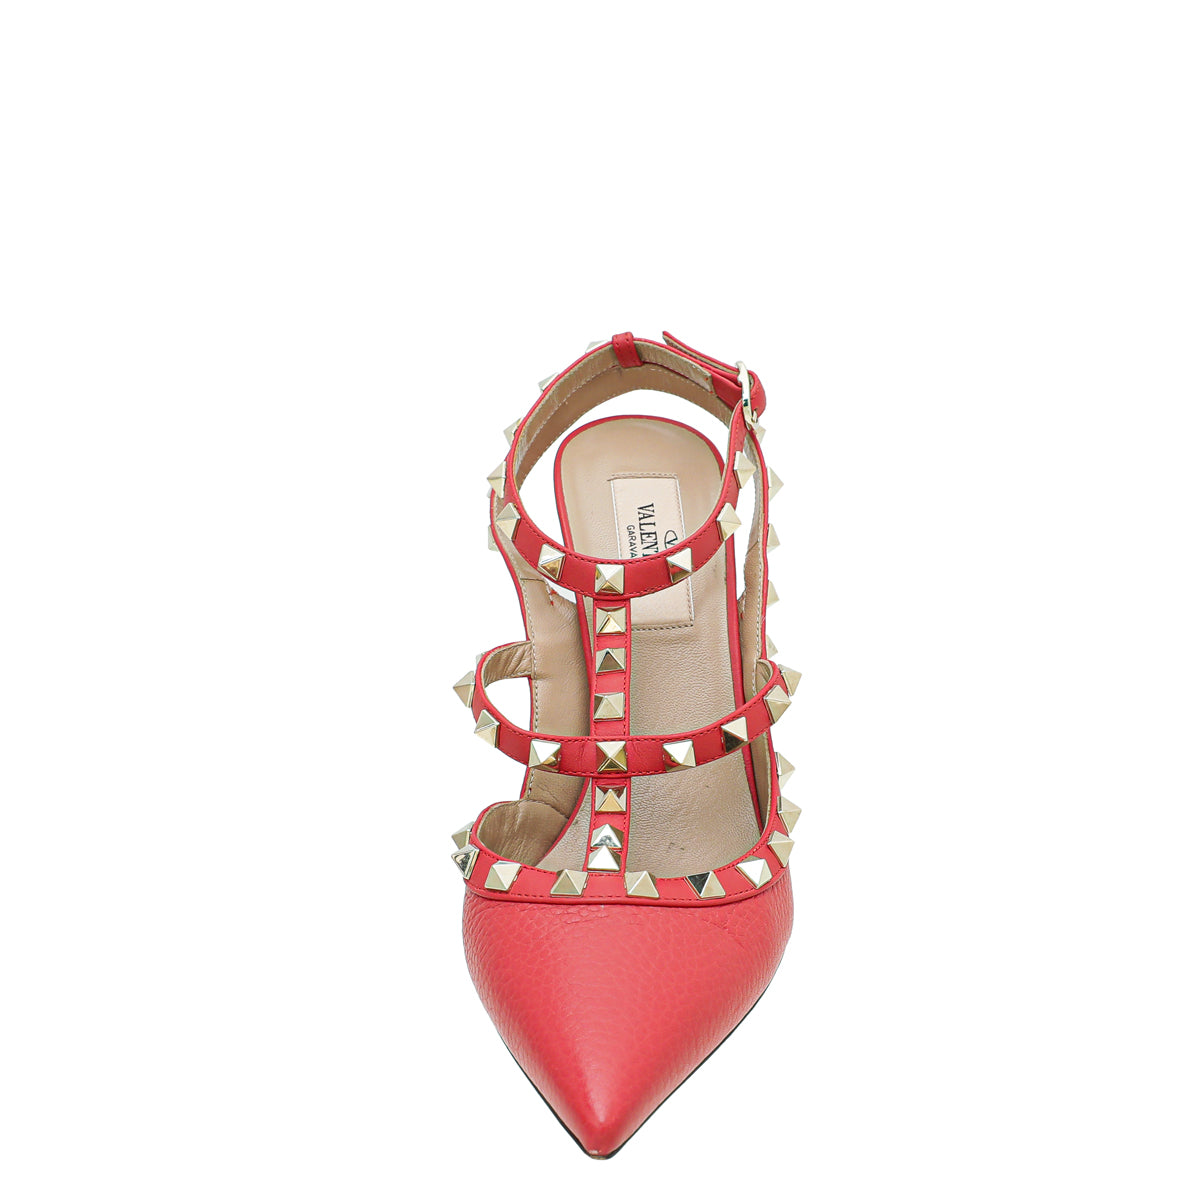 Valentino Red Rockstud Caged Ankle Strap Pump 38